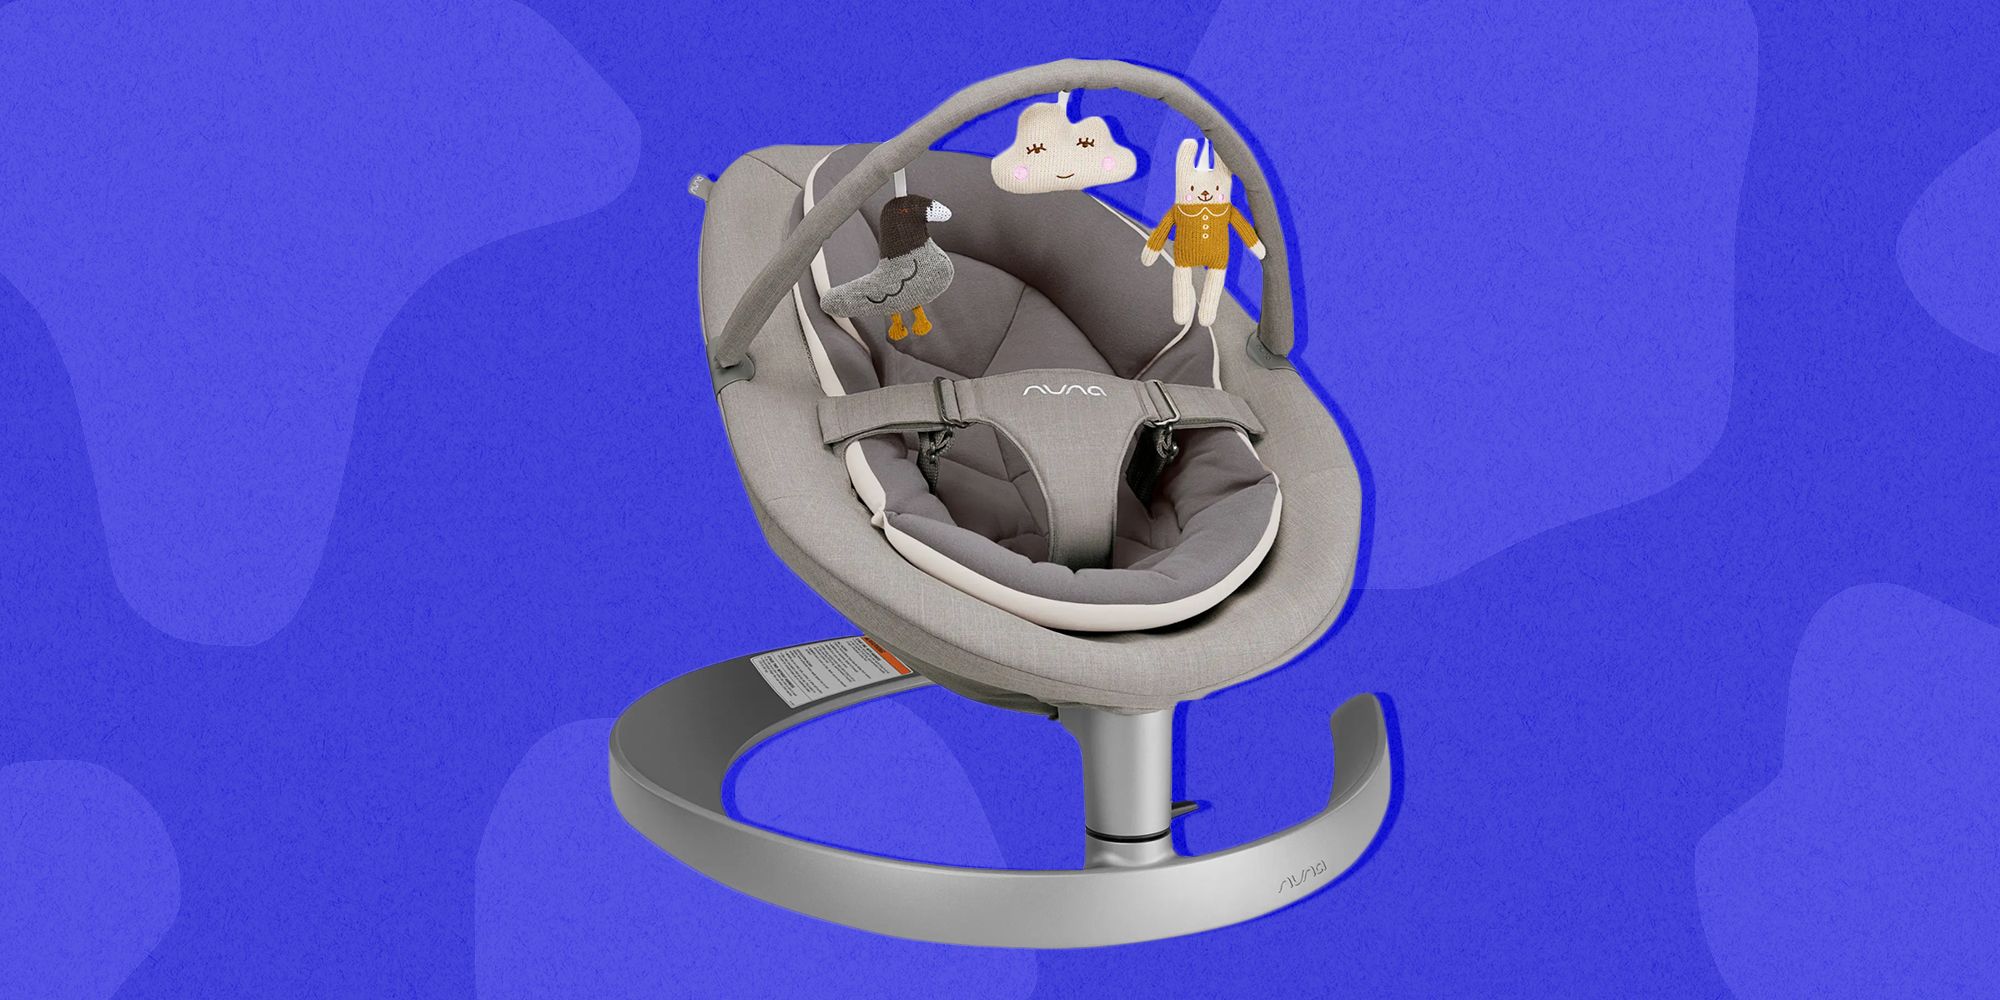 US Fast Shipment Toddler Bouncer Rocker Sleeping Chair with Music Multicolour, US Direct Comfort Multifunctional Soothing Portable Swings Rocking Chair Cradle Infants Bassinet Baby Cradle Swing 